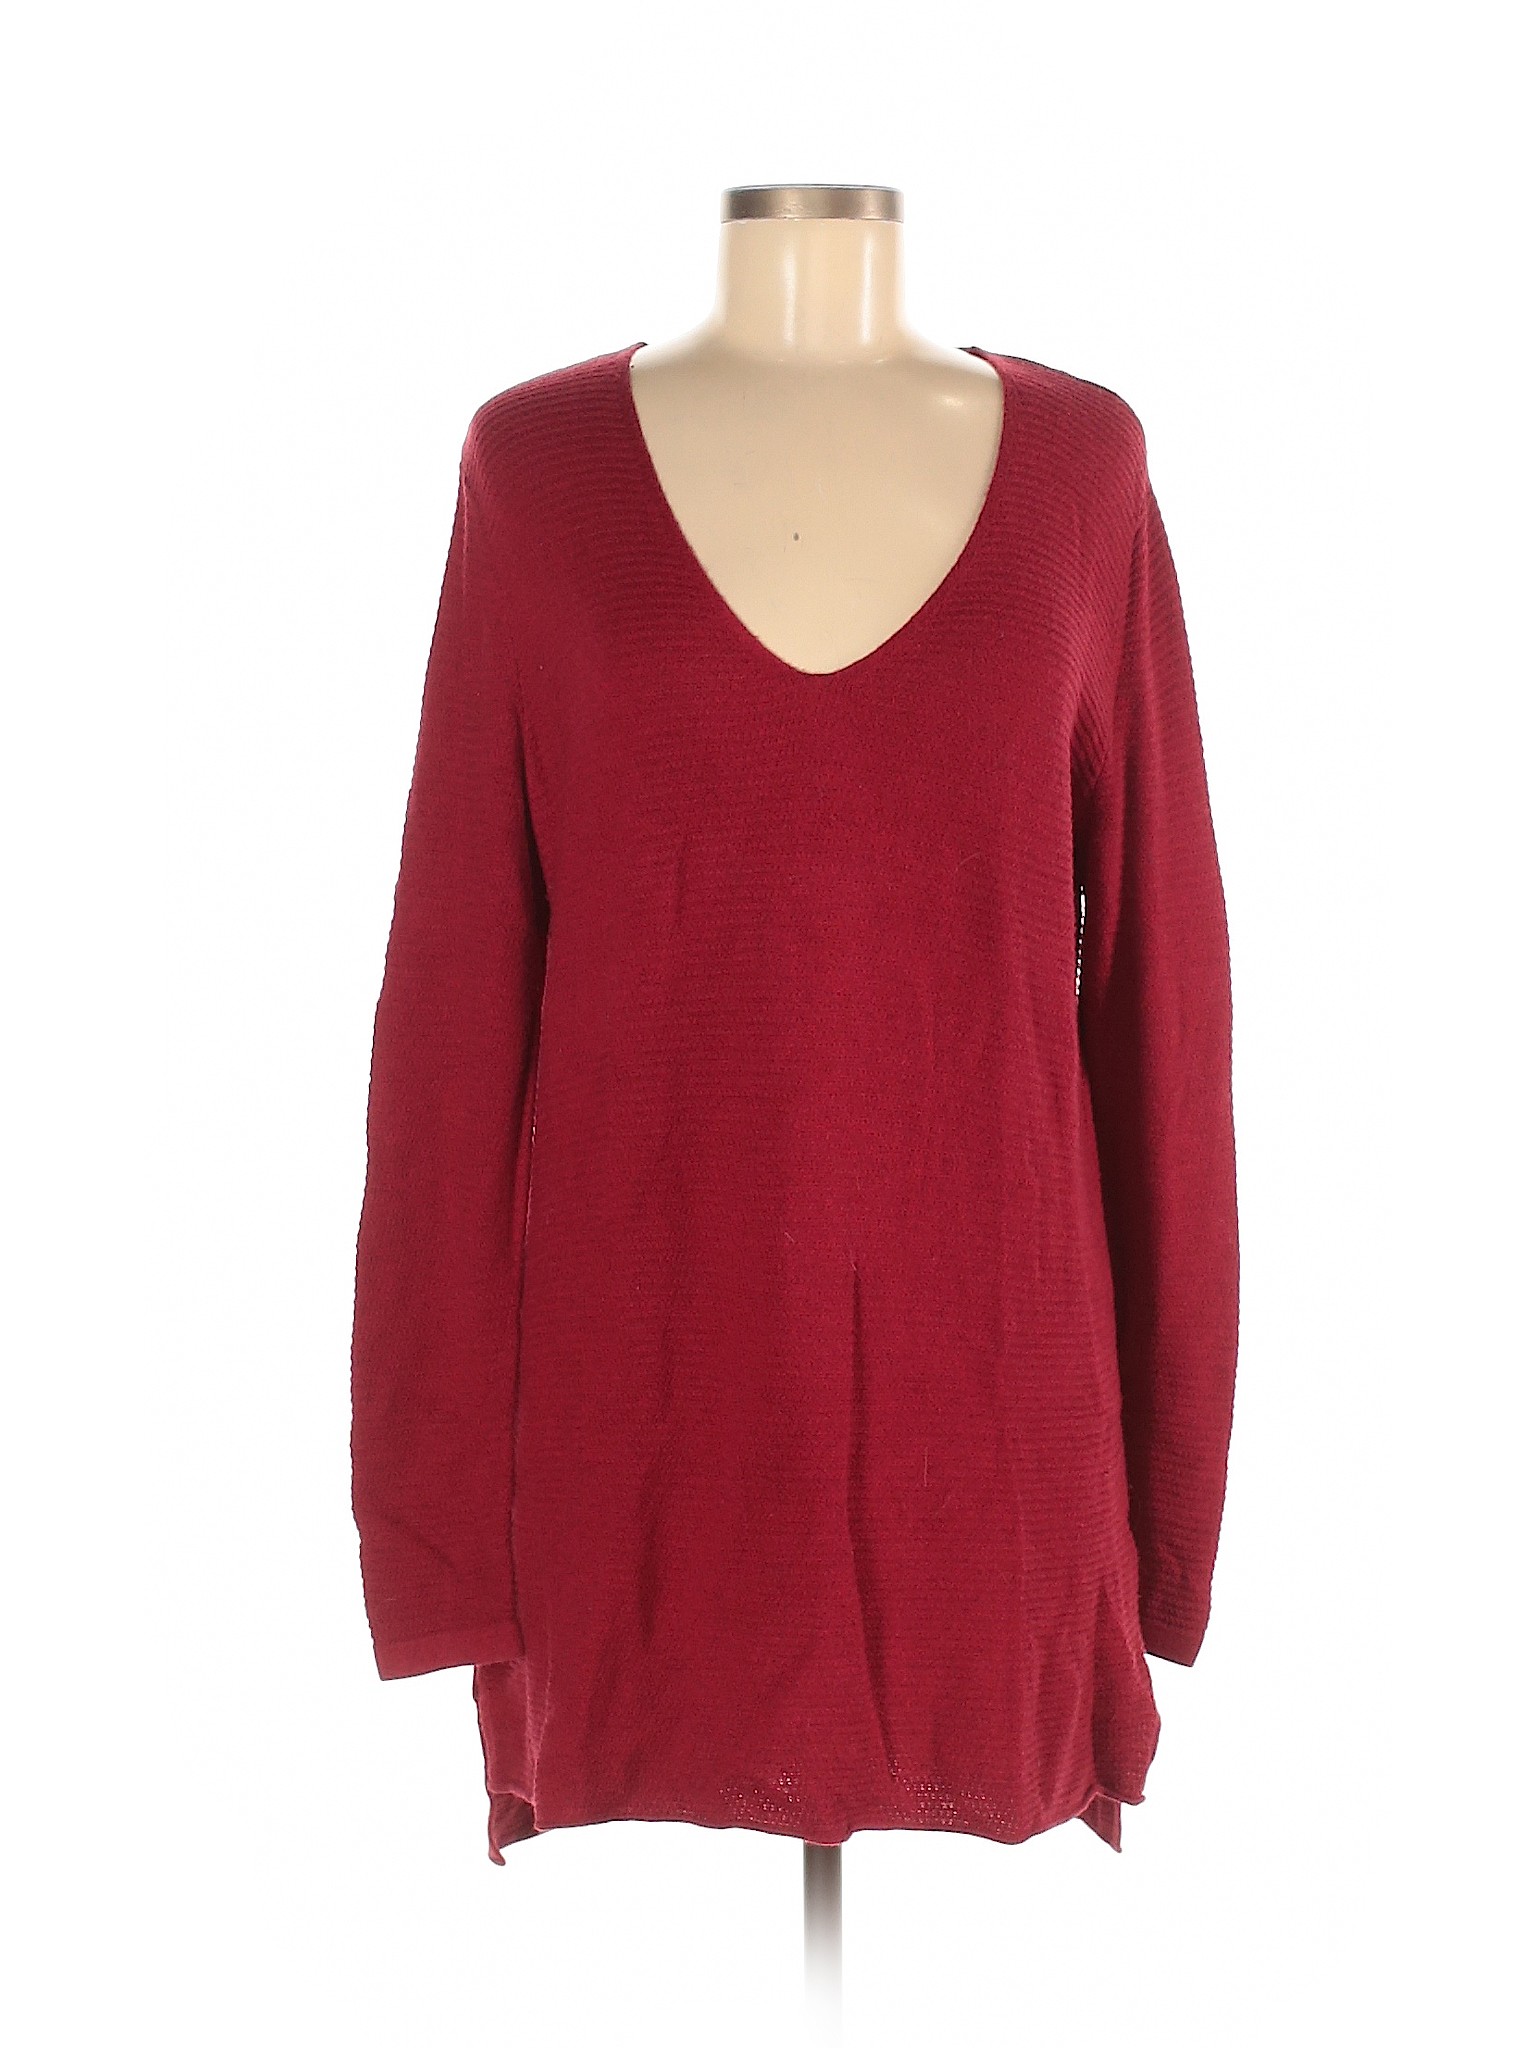 Old Navy Women Red Pullover Sweater L | eBay